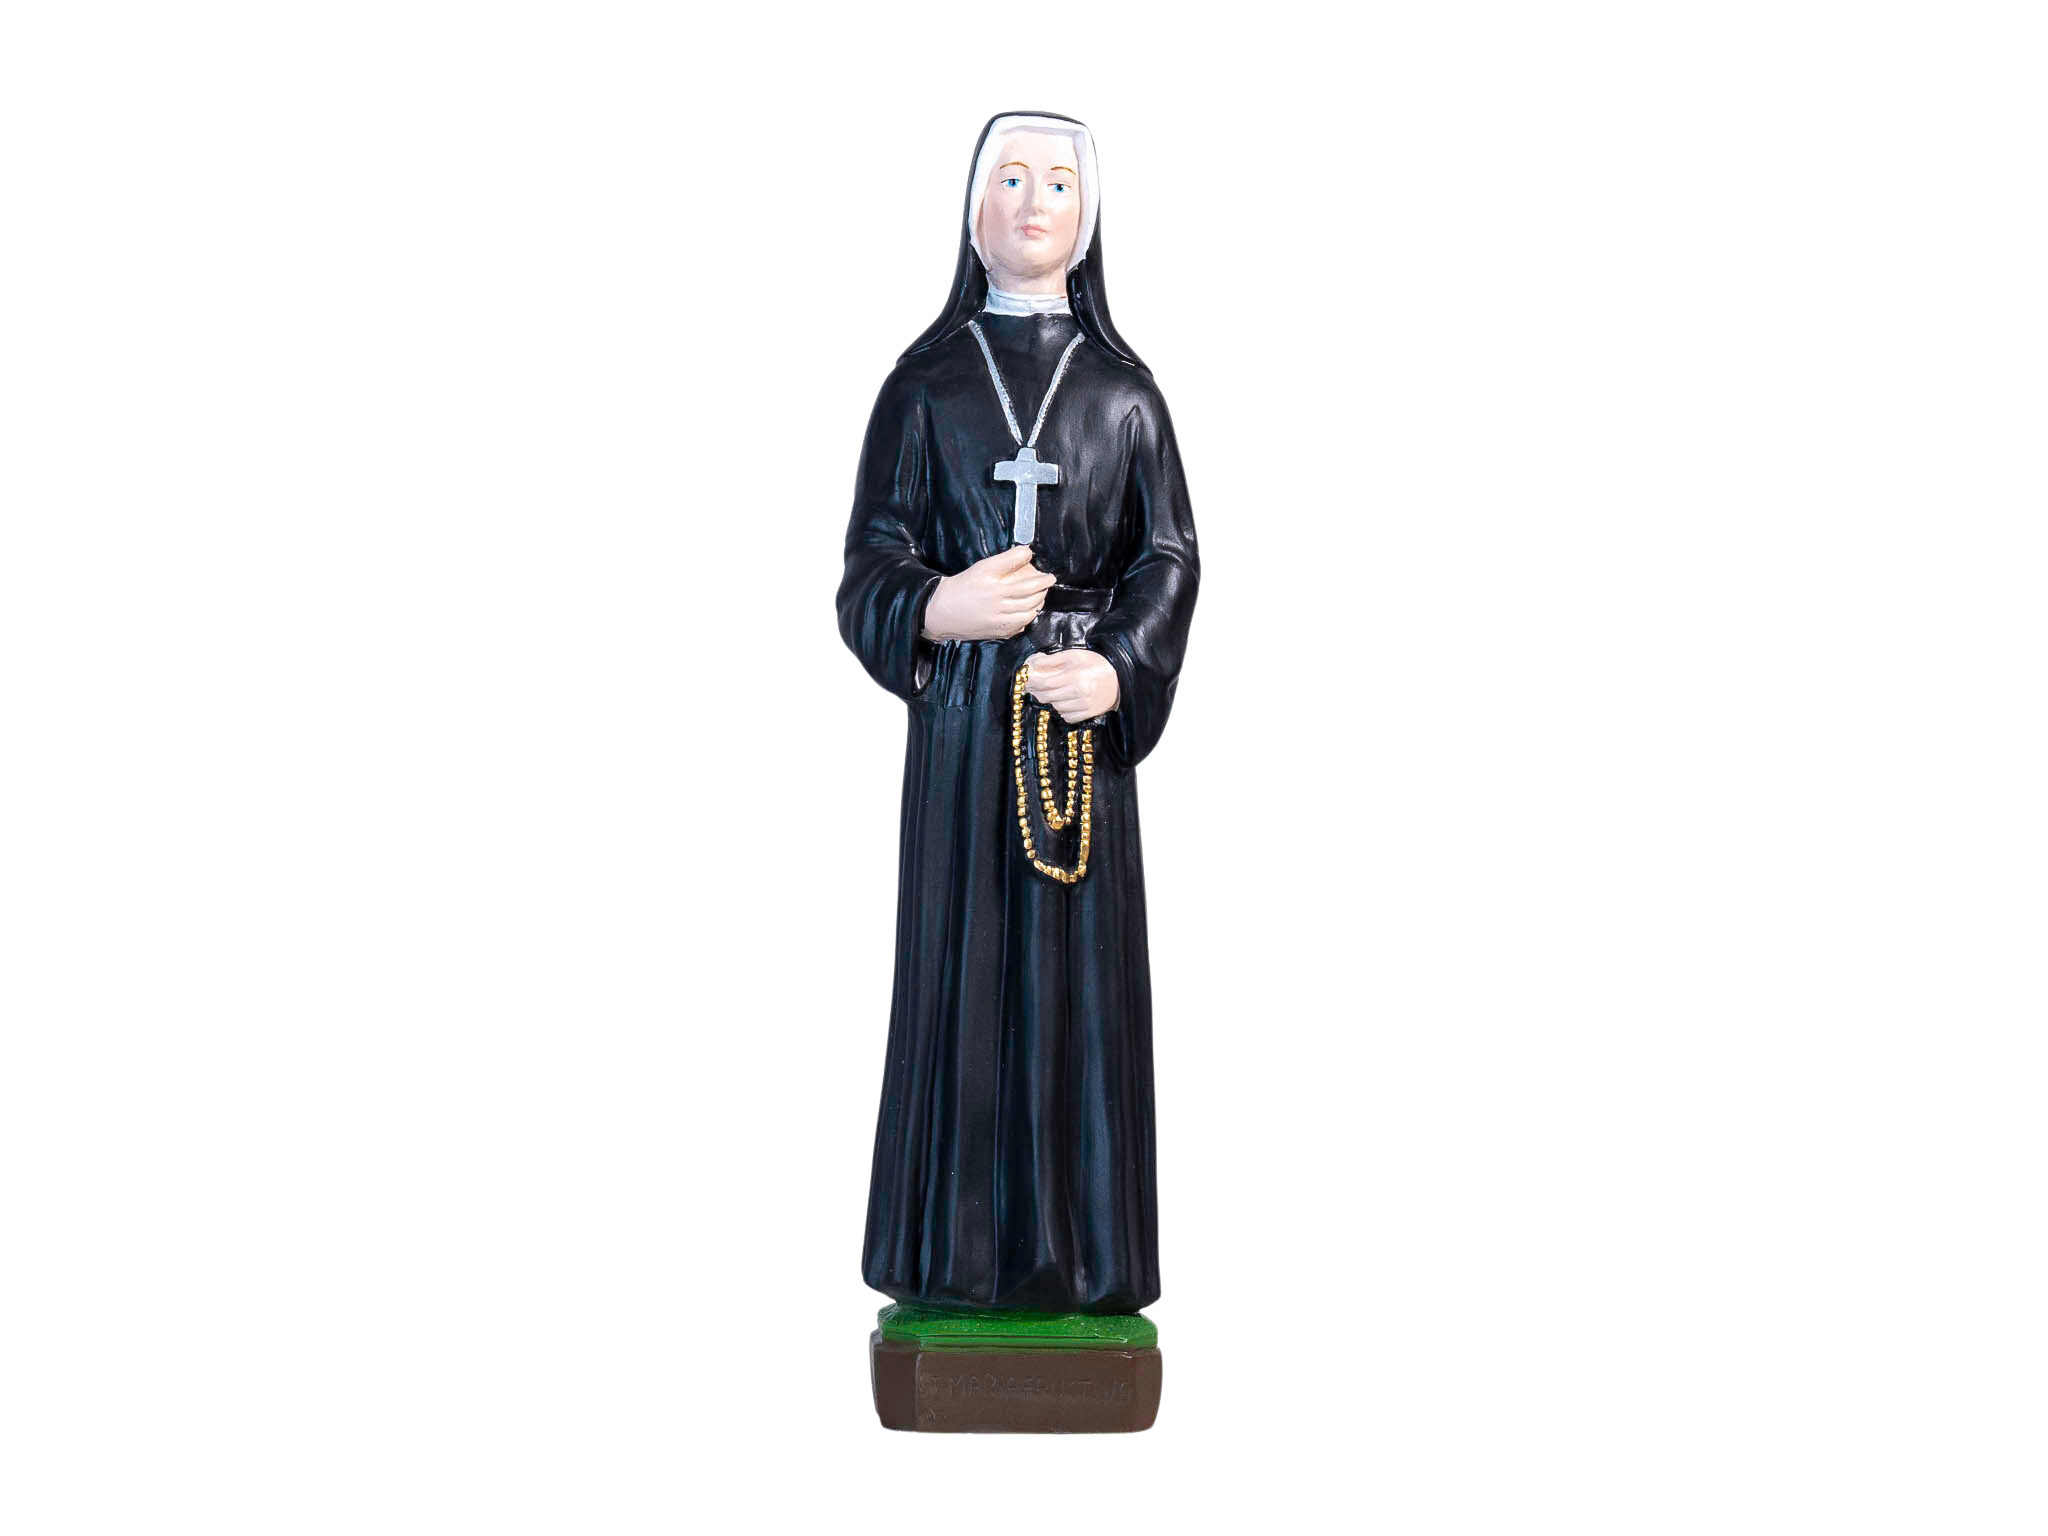 The Faith Gift Shop Sister Faustina Statue- Hand Painted in Italy - Our Tuscany Collection -  Estatua de Santa Faustina